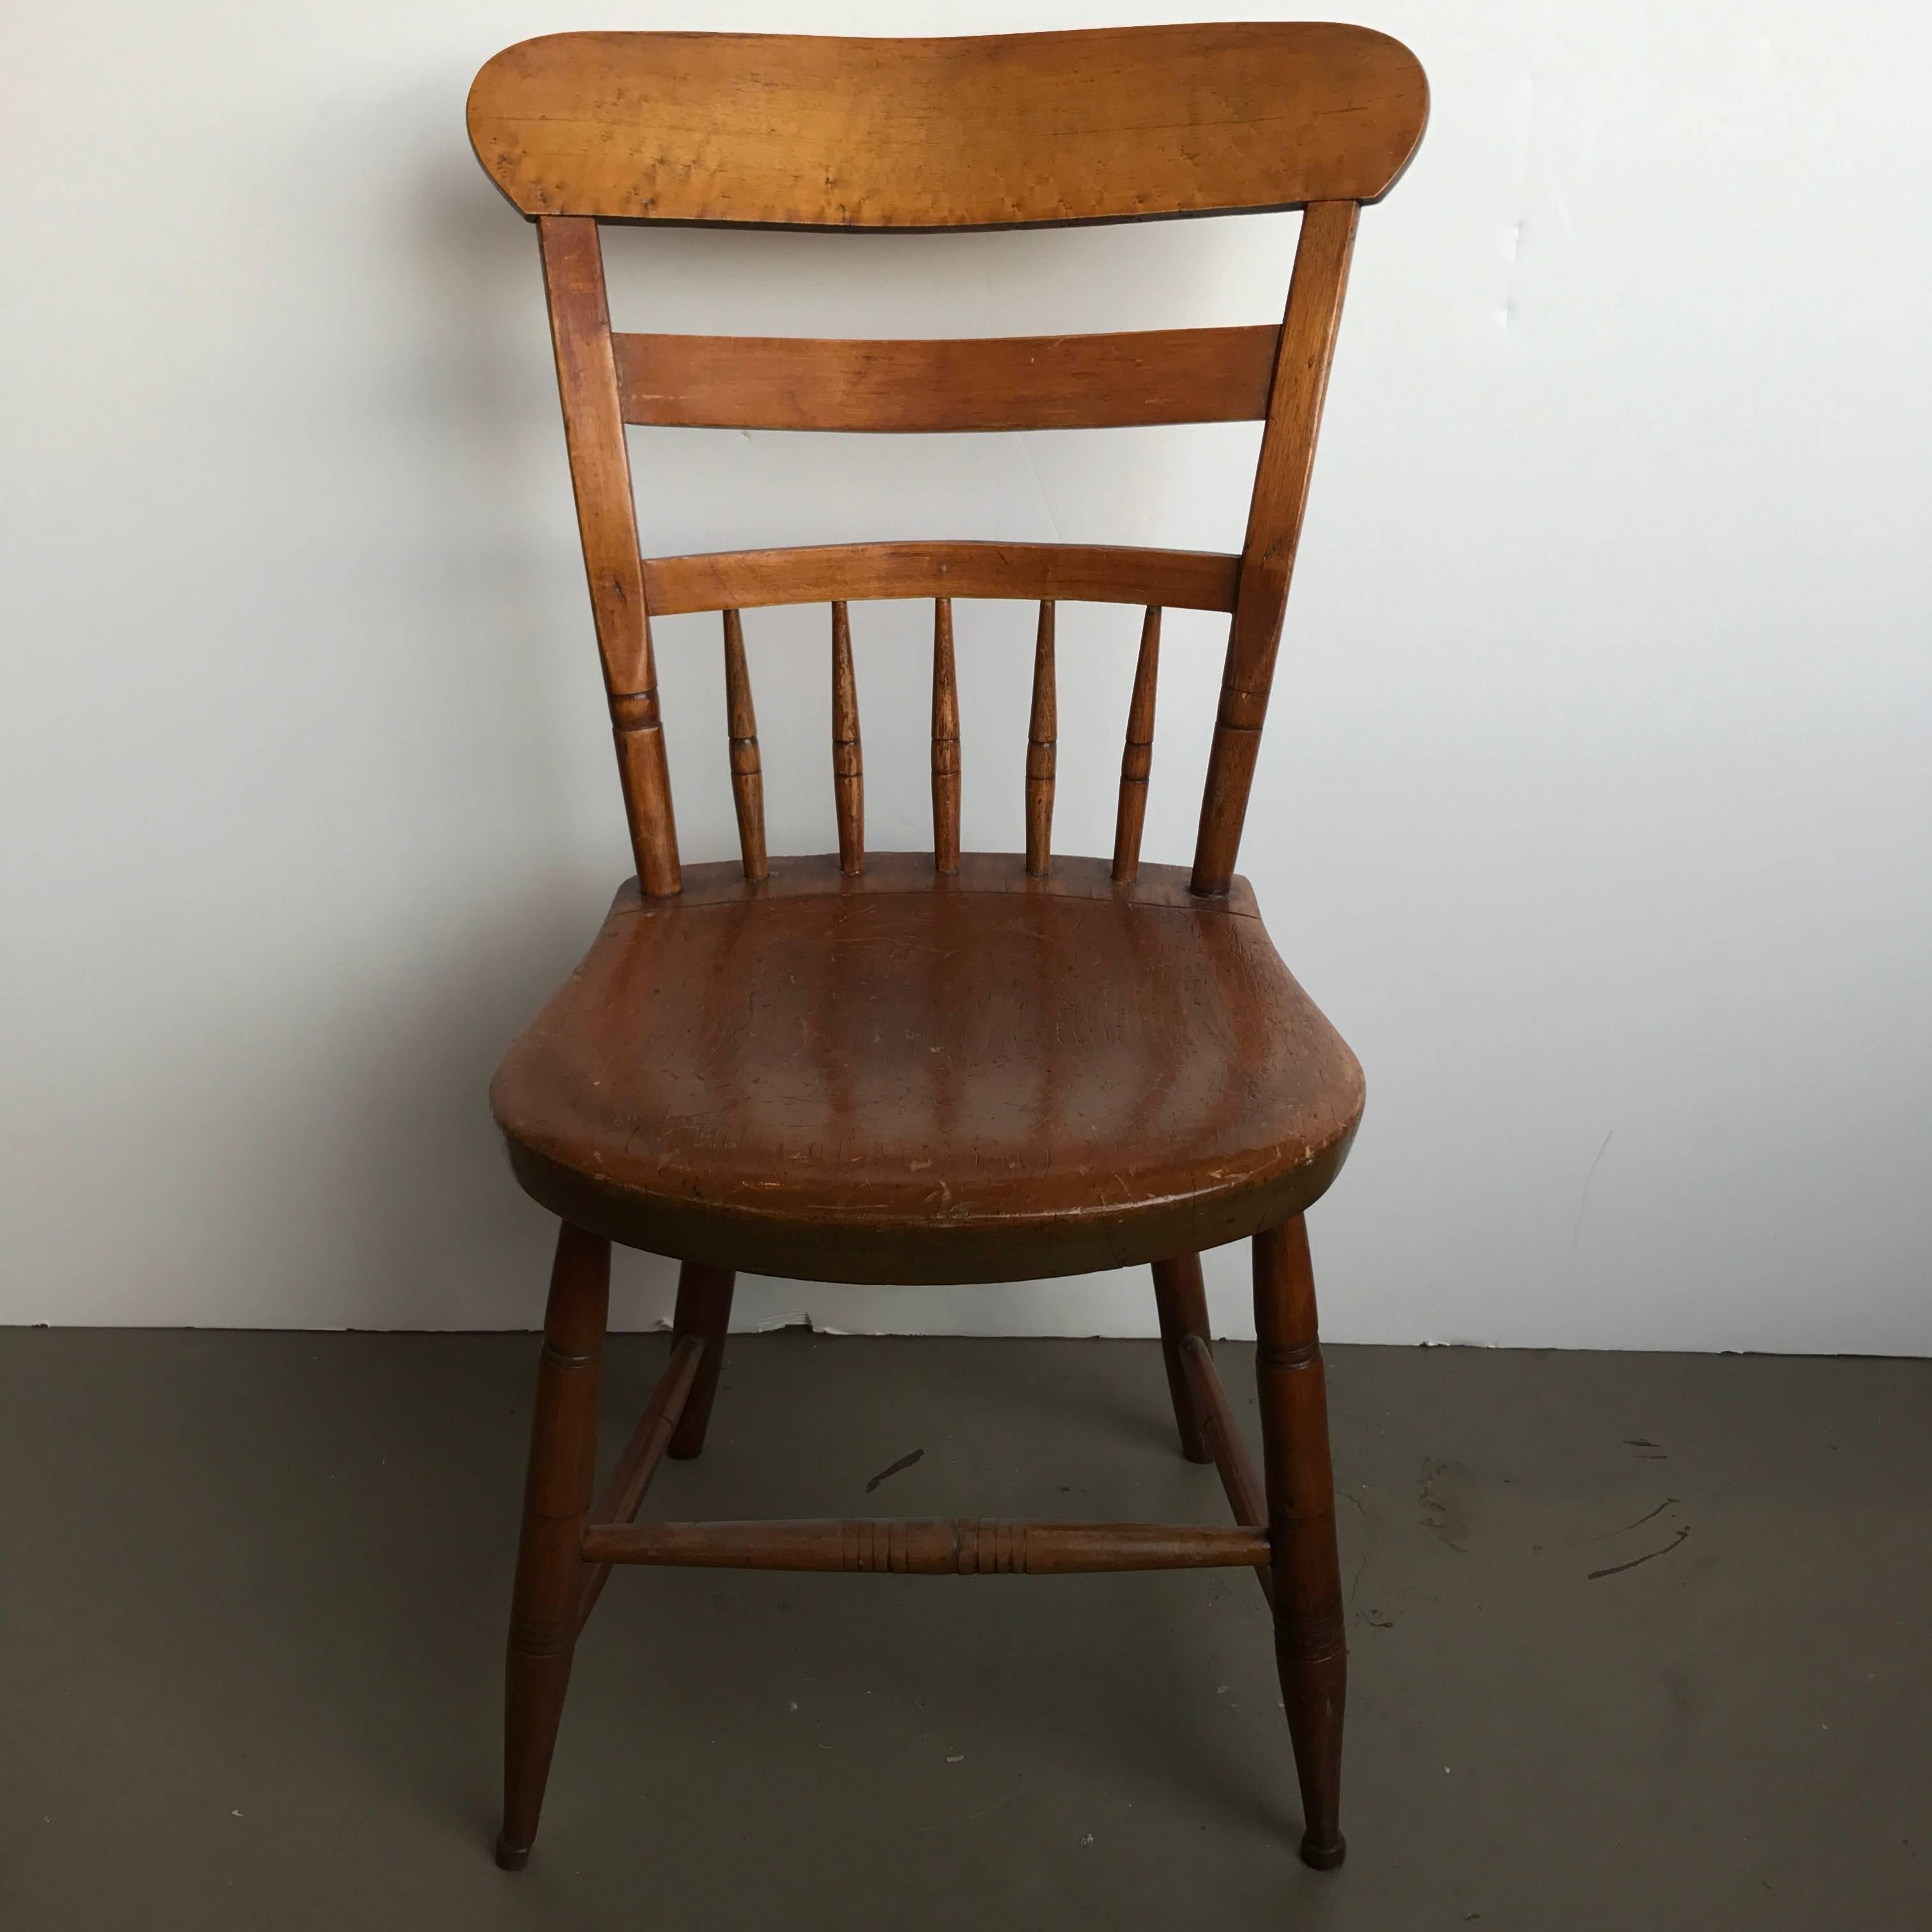 19th century American maple side chair.